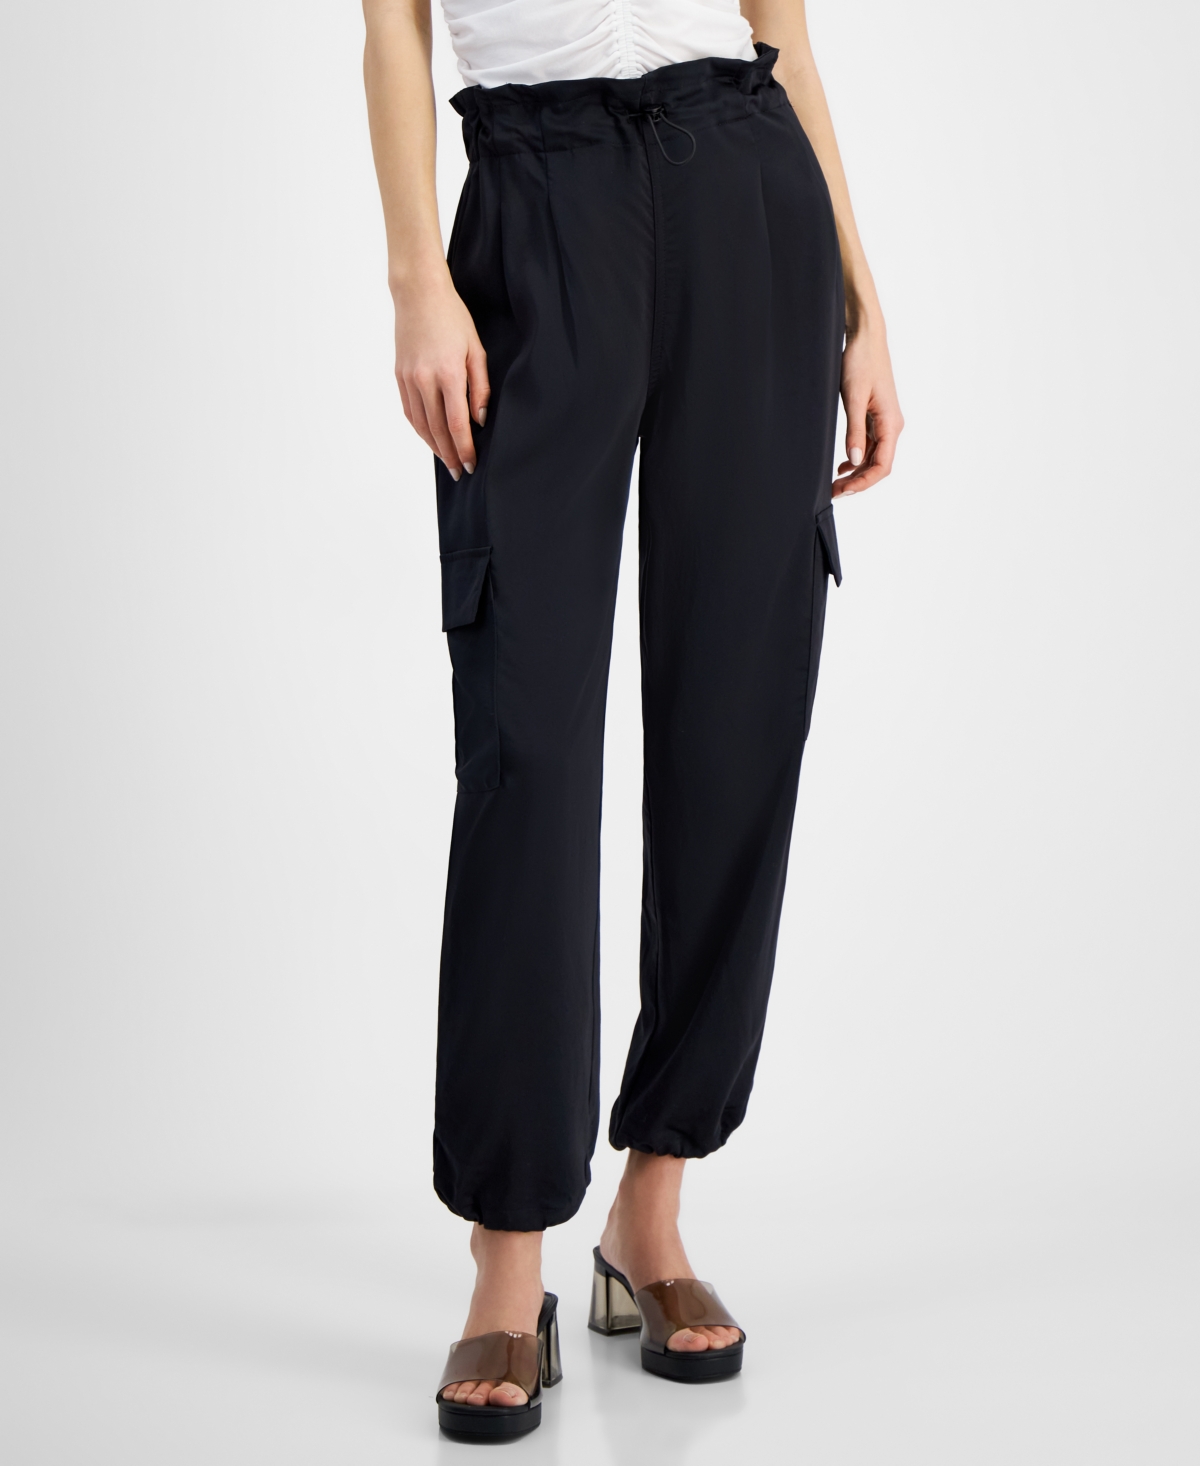 Dkny Jeans Women's High-waisted Cargo Pants In Blk - Black